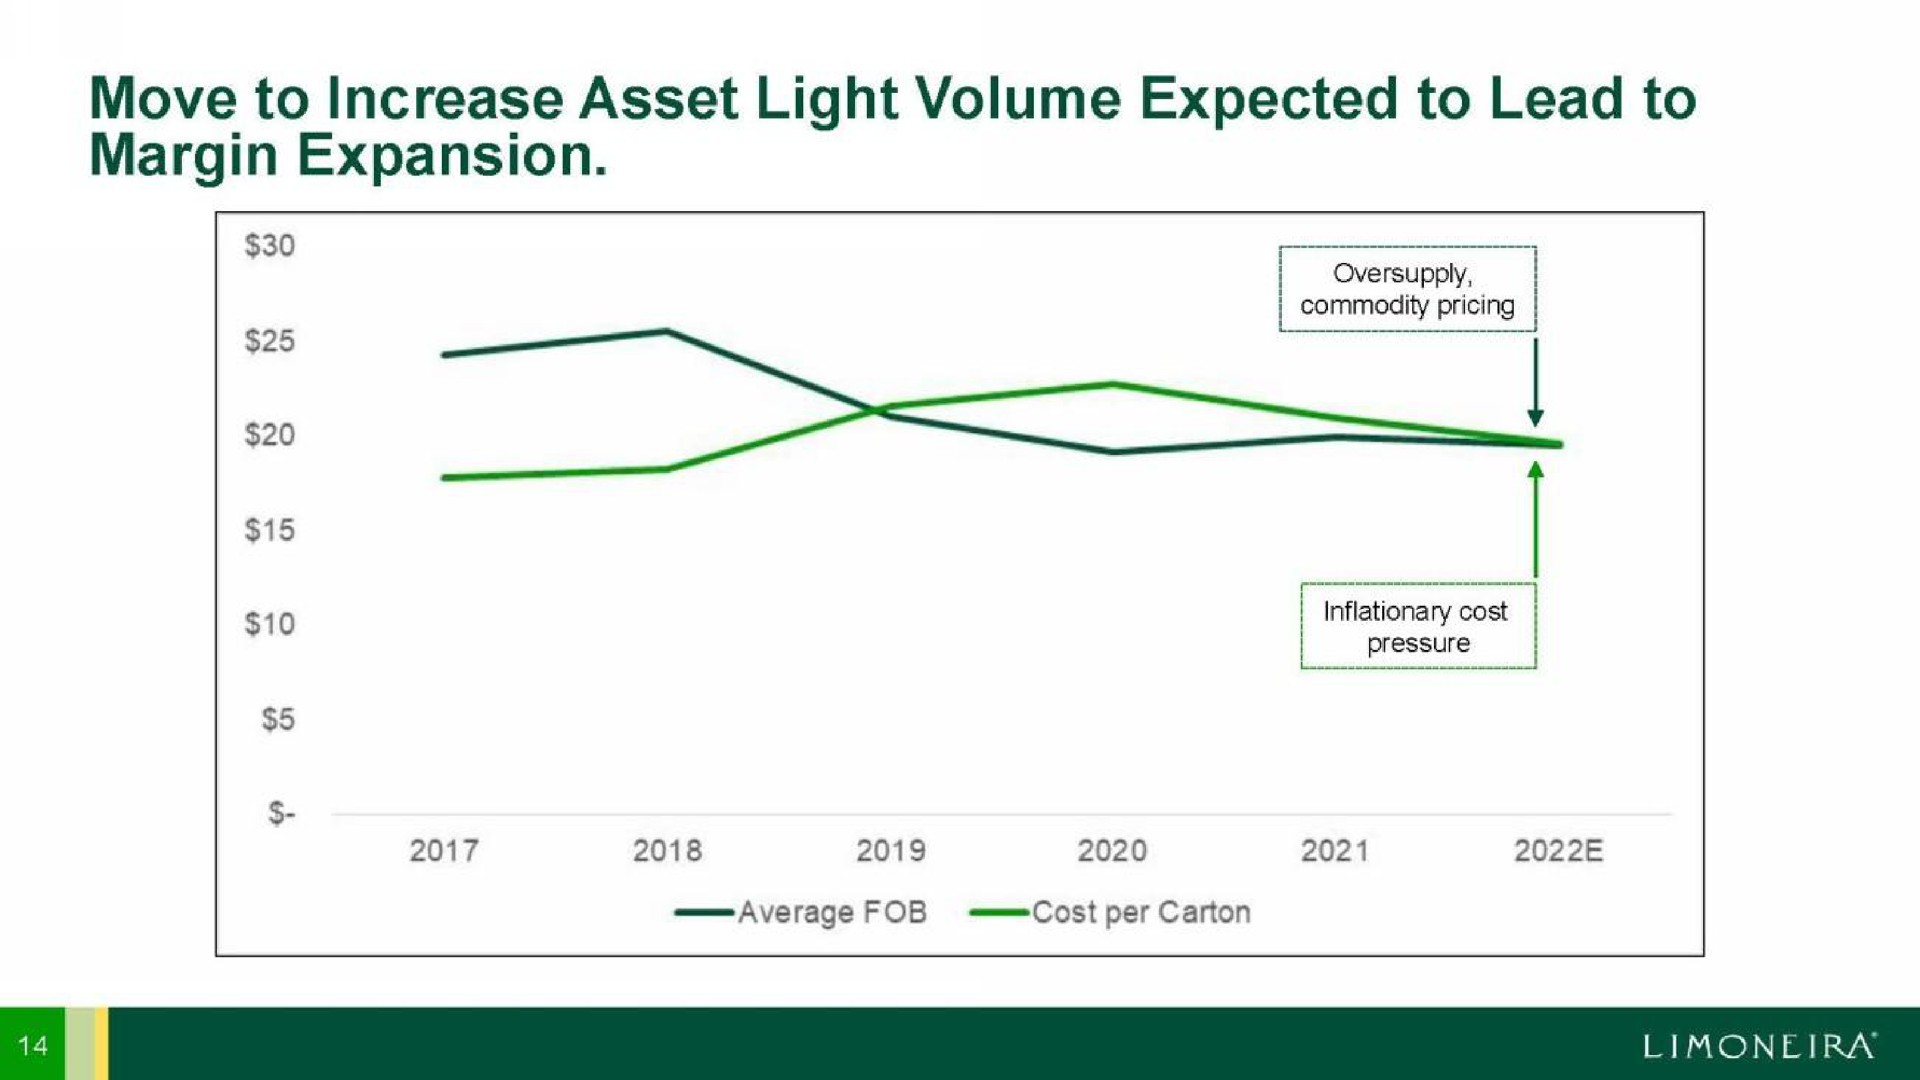 move to increase asset light volume expected to lead to margin expansion | Limoneira